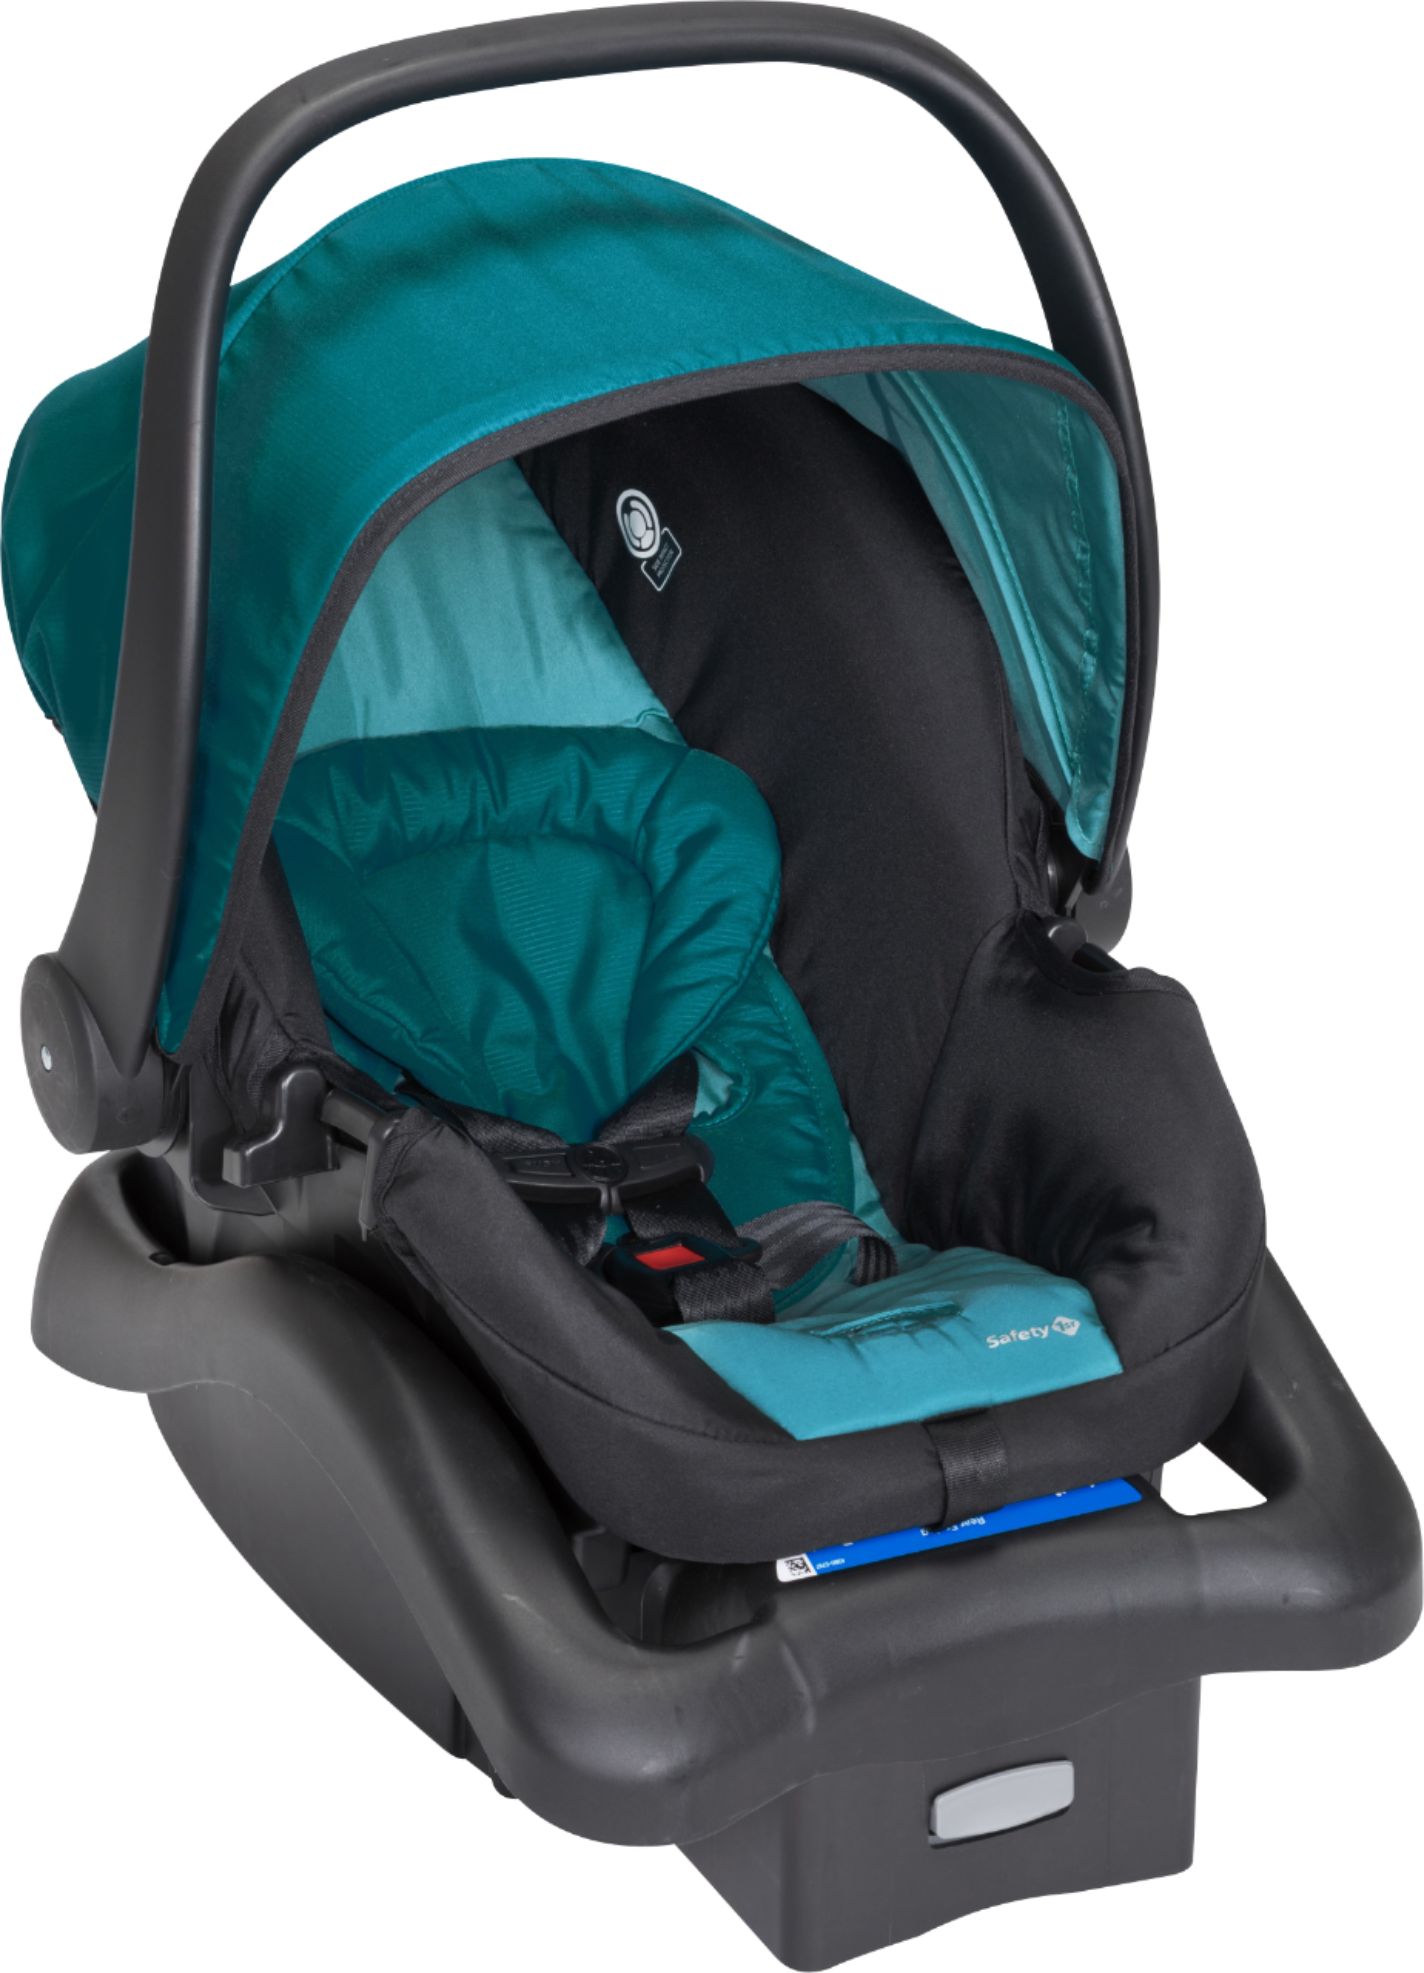 Angle View: Safety 1st - RIVA™ 6-in-1 Flex Modular Travel System - Blue